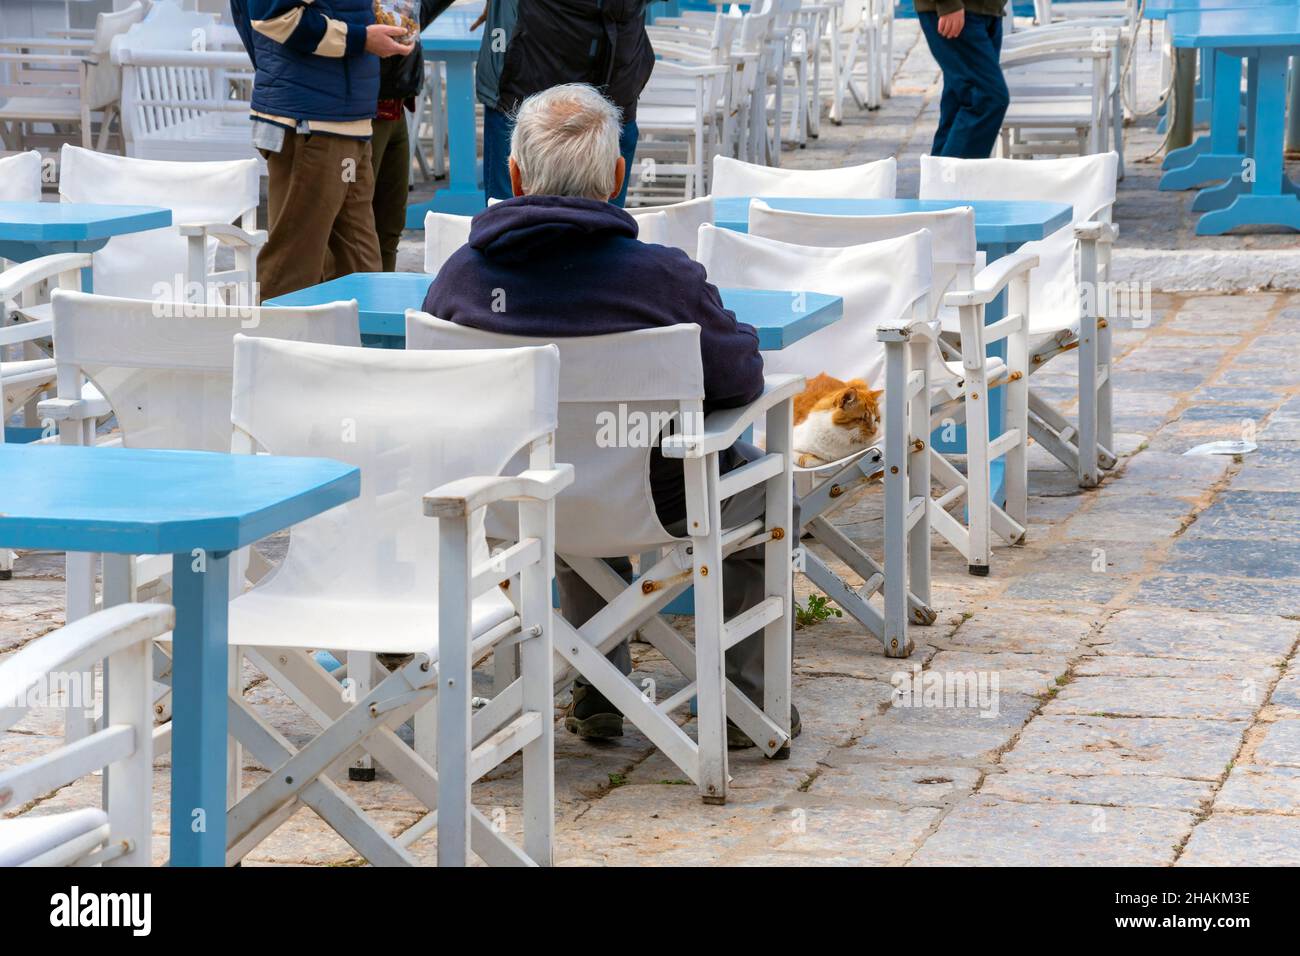 An older Greek fisherman sits at a table of an outdoor cafe with an orange and white cat on the Greek island of Hydra, Greece. Stock Photo